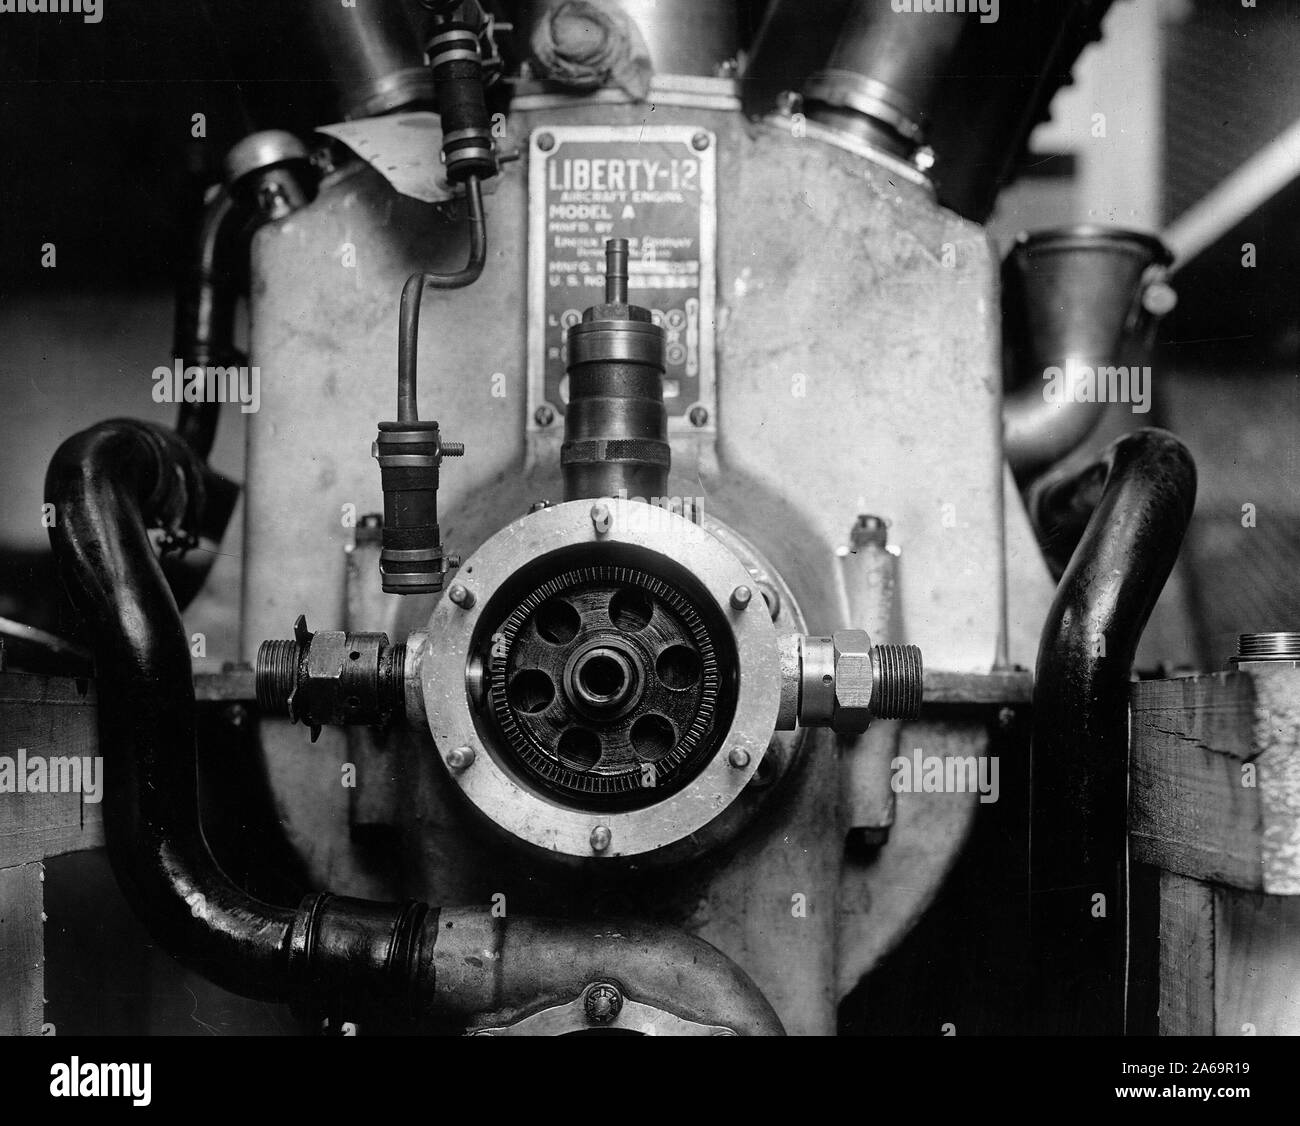 C.C. Gear on Liberty '12' Aircraft engine as used on DH4 planes. Nut on shaft removed to permit removal of cams Stock Photo